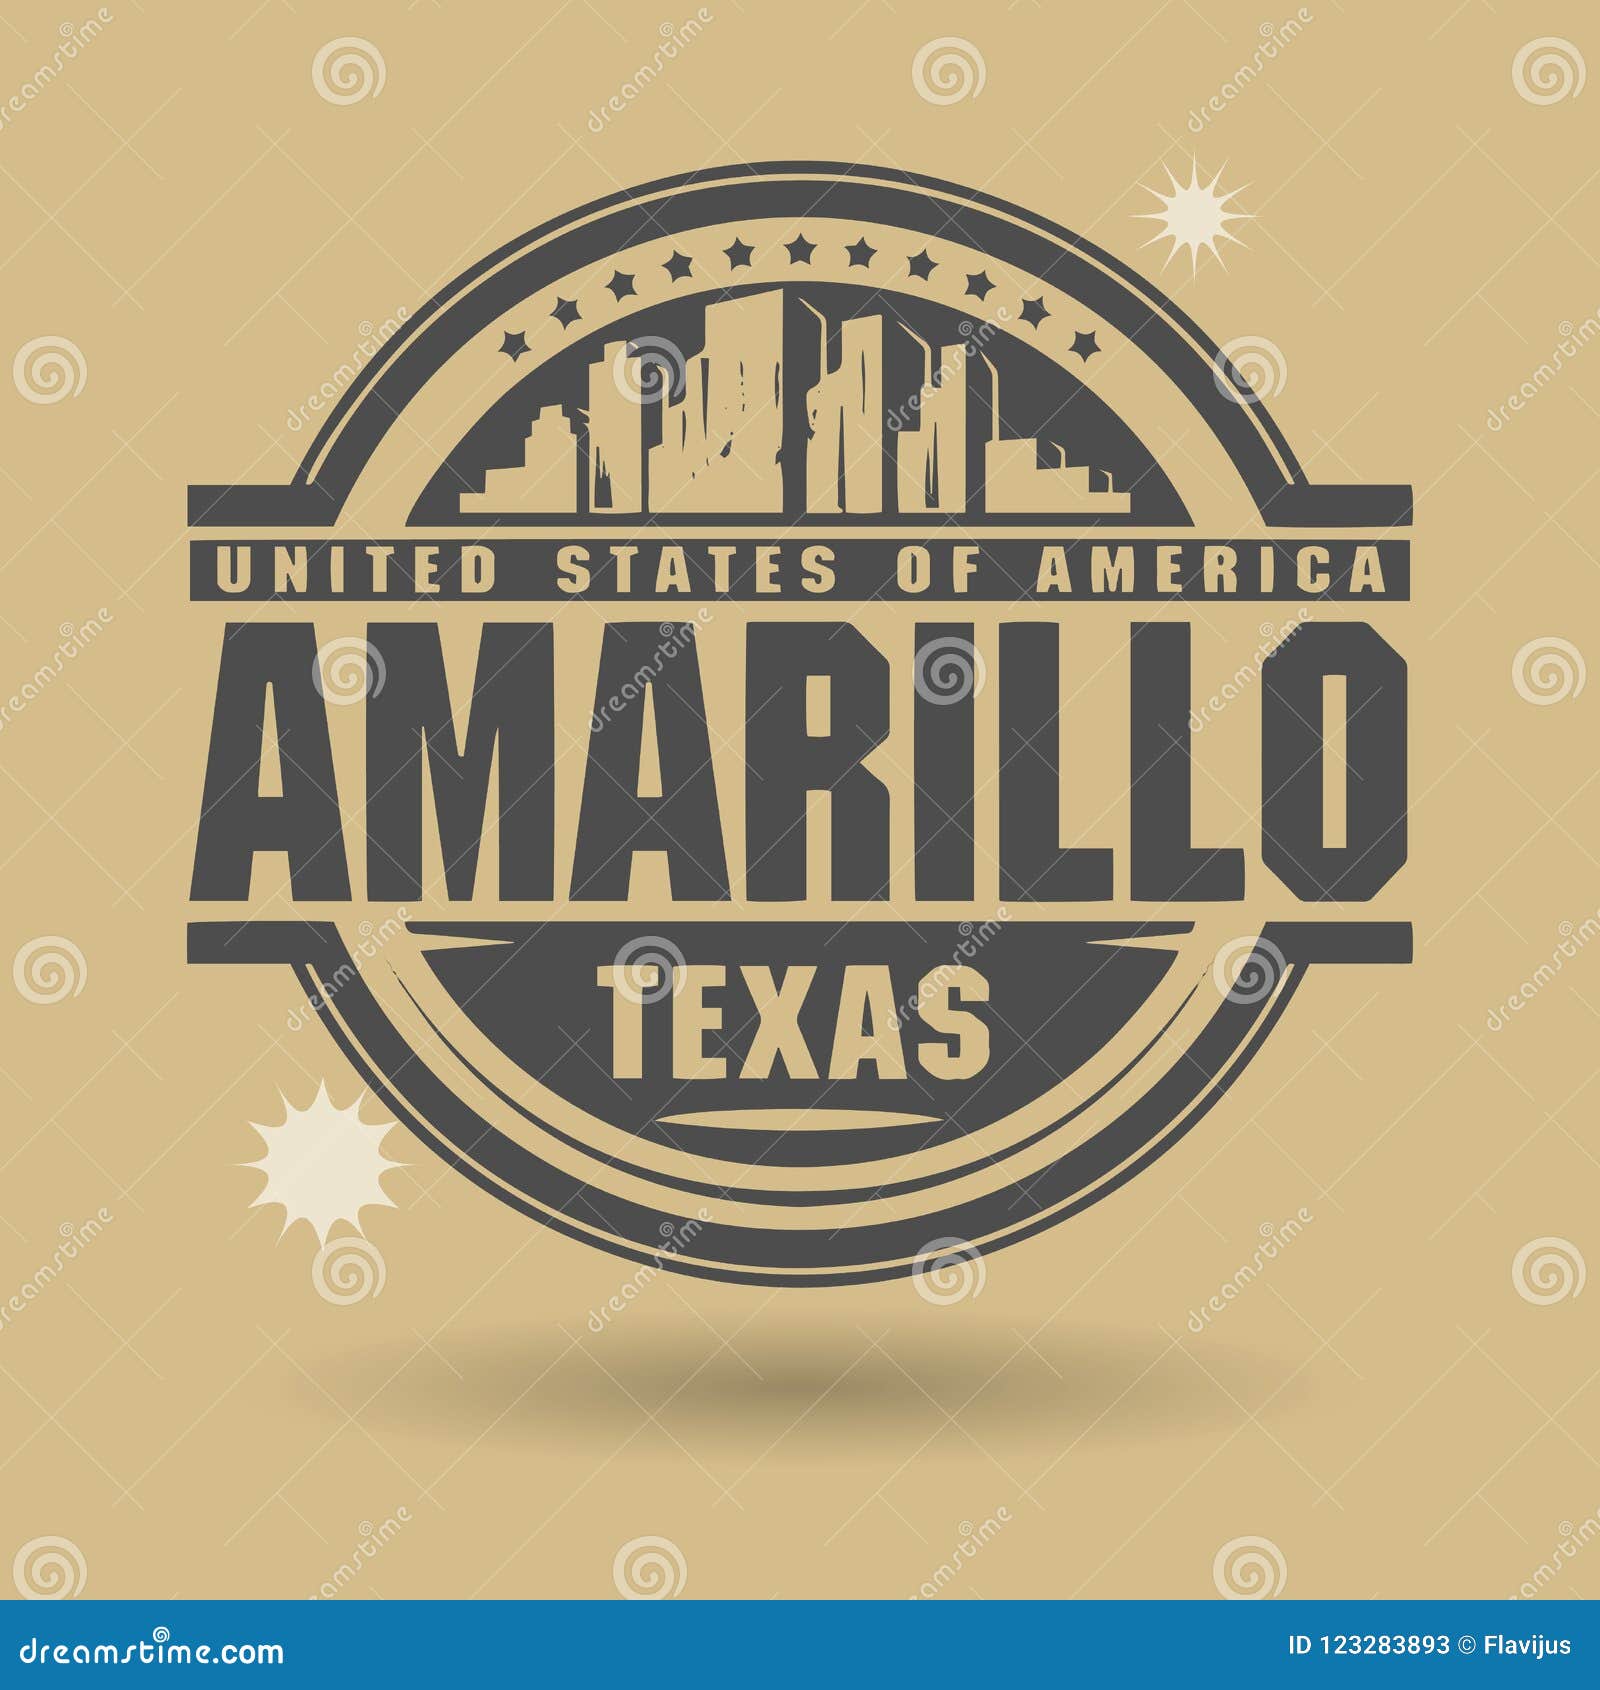 stamp or label with text amarillo, texas inside